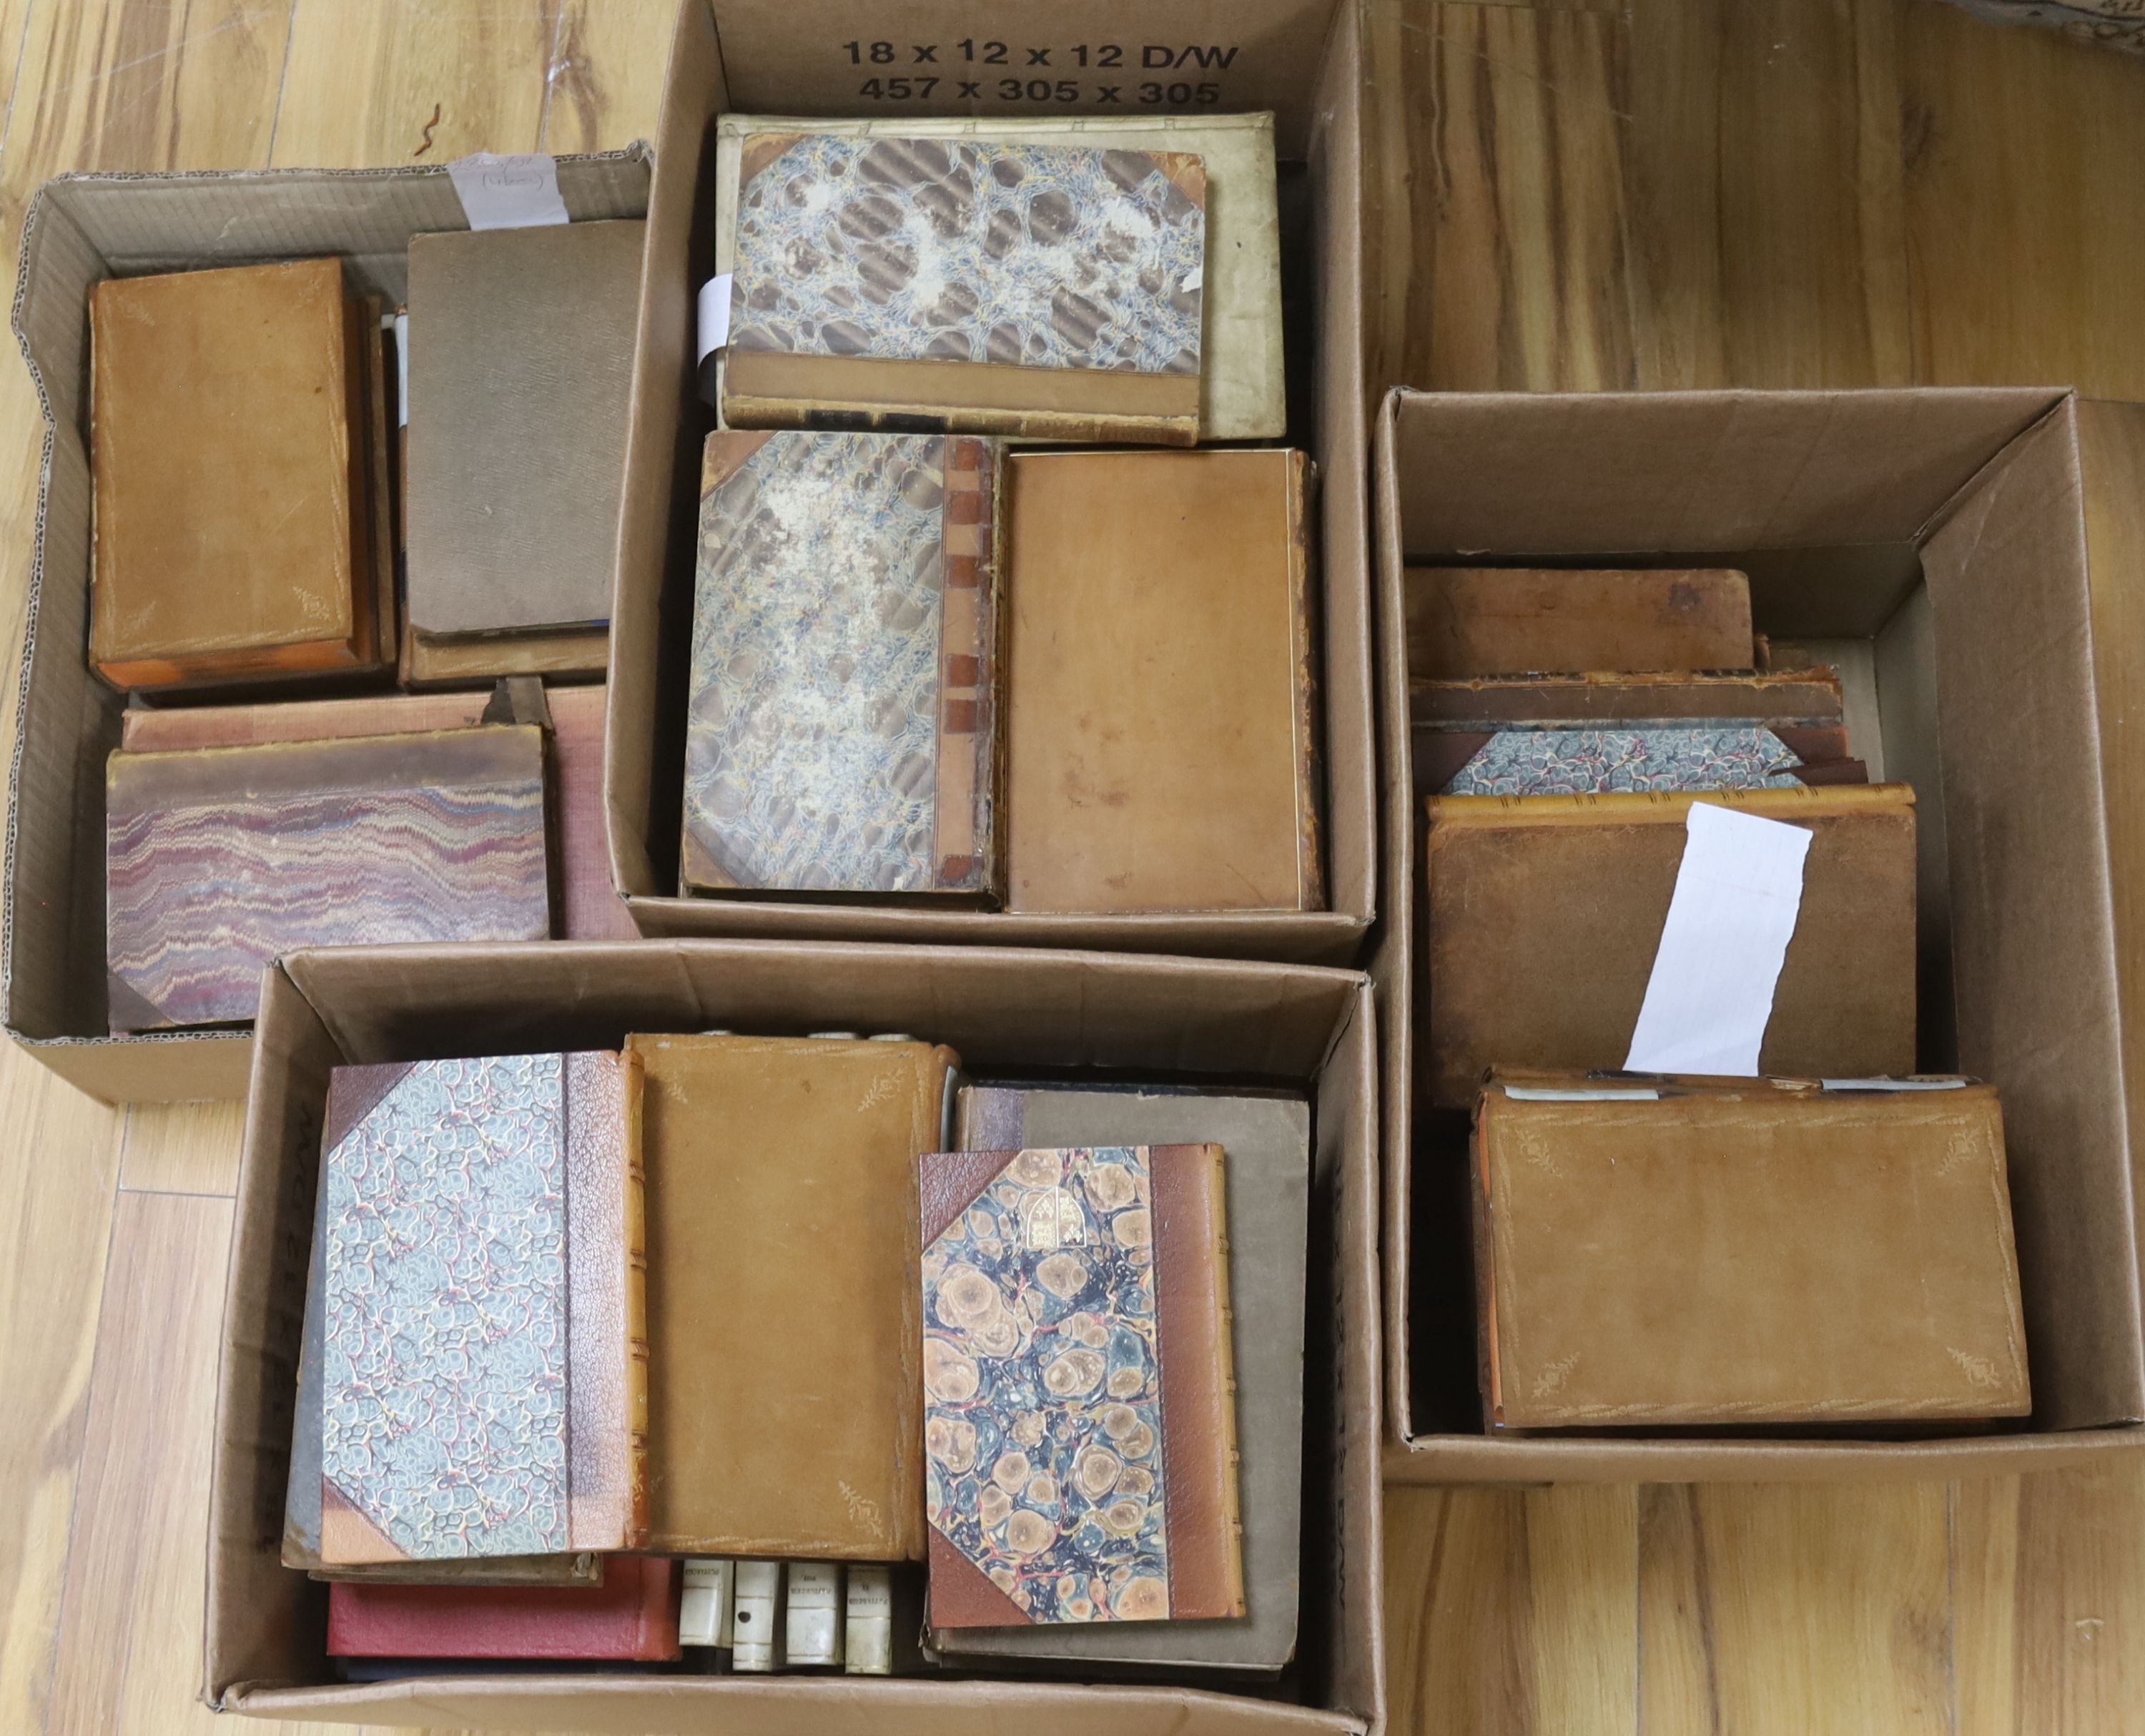 Antiquarian Books - Classics Editions, 18th and 19th centuries, various bindings (mostly leather), approx 60.